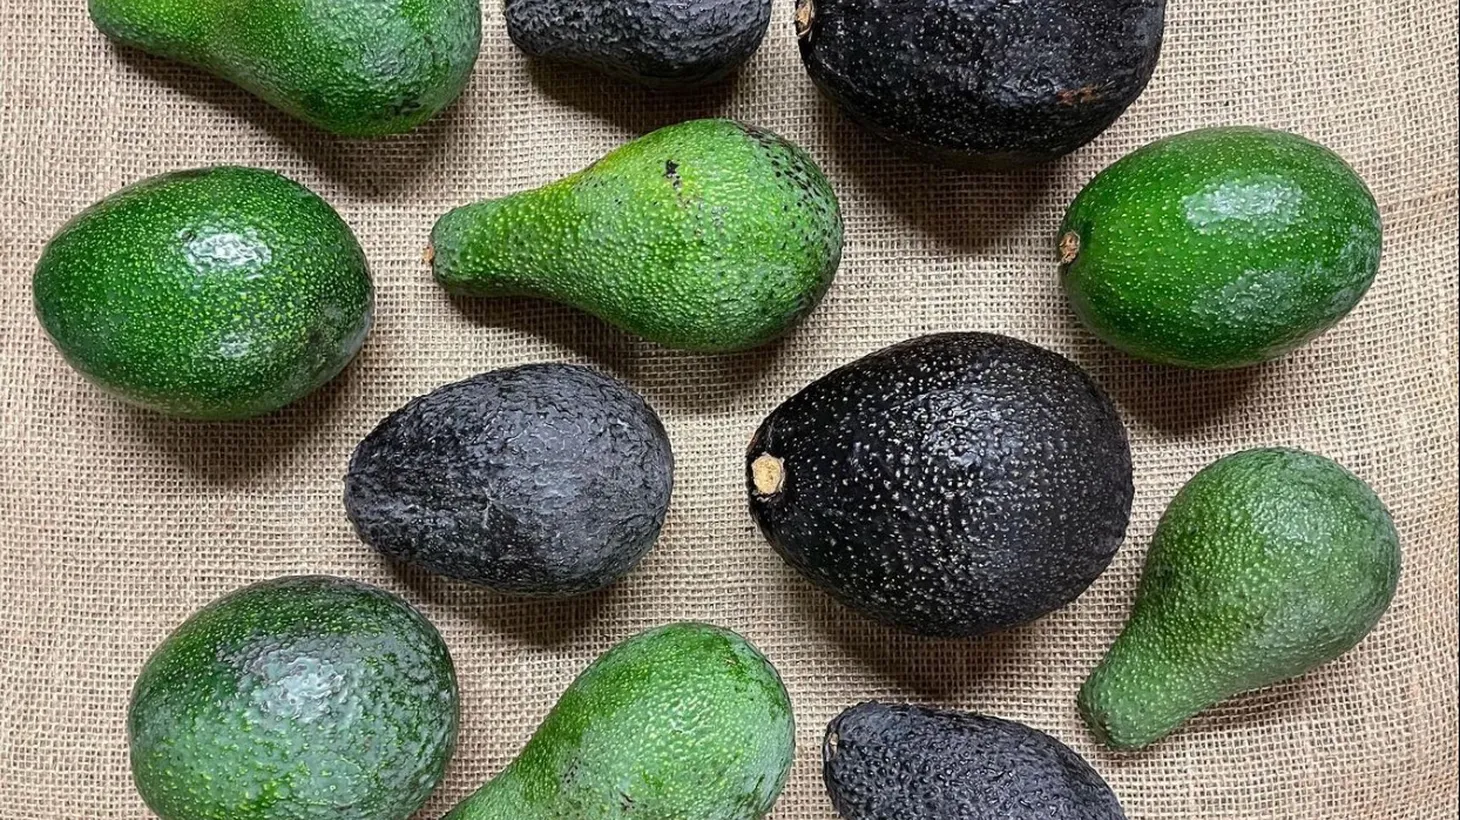 Avocados are seasonal, and varieties change throughout the year like these from JJ’s Lone Daughter Ranch in Redlands, Calif.